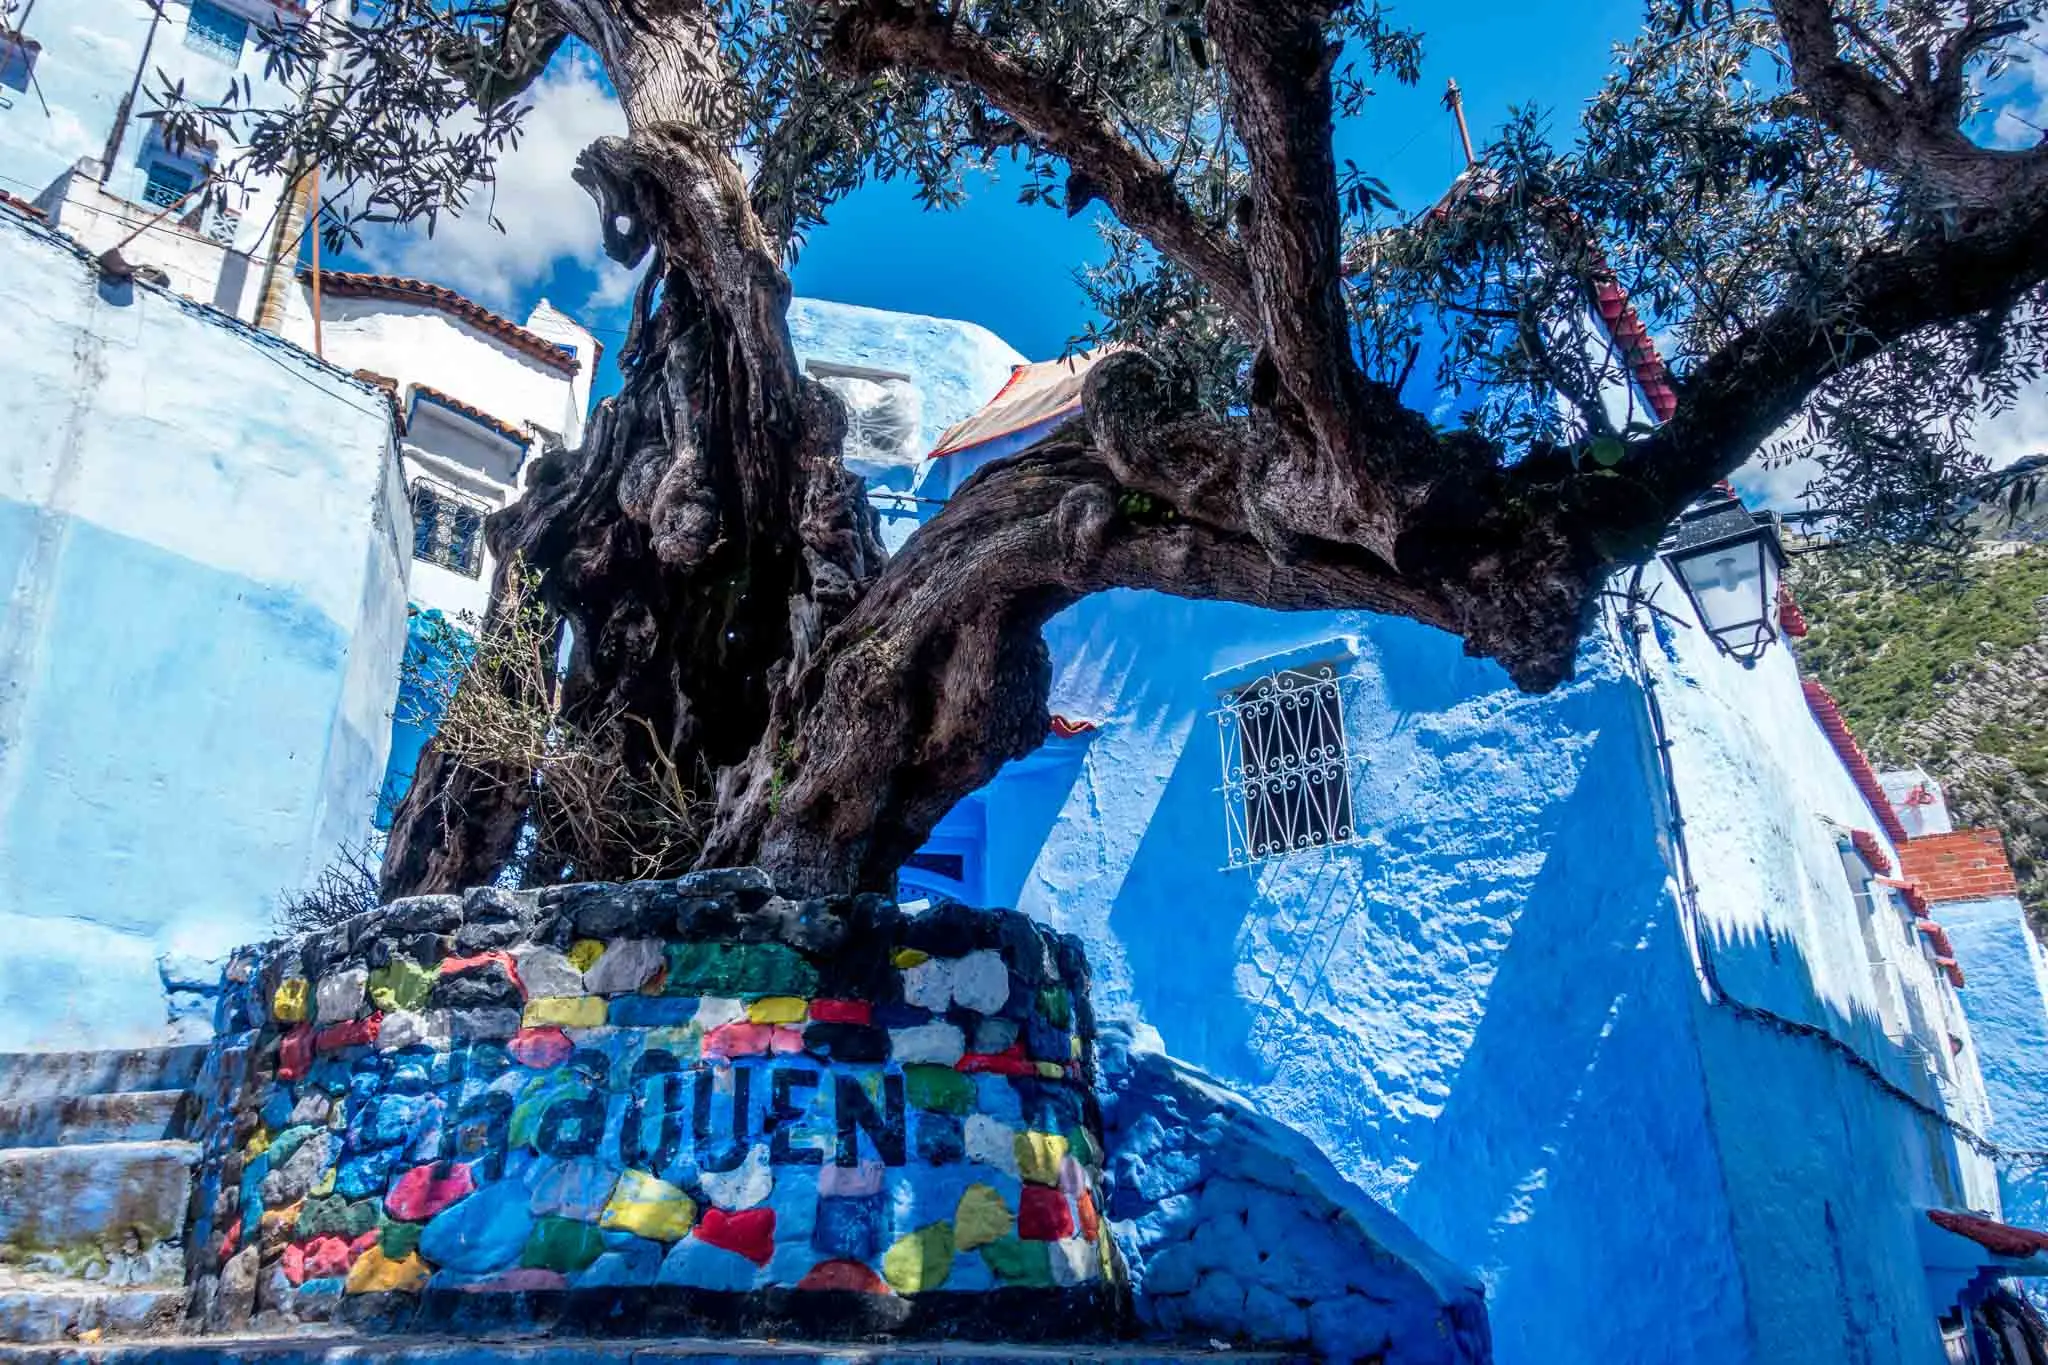 Large tree growing from a stone planter painted with "Chaouen"